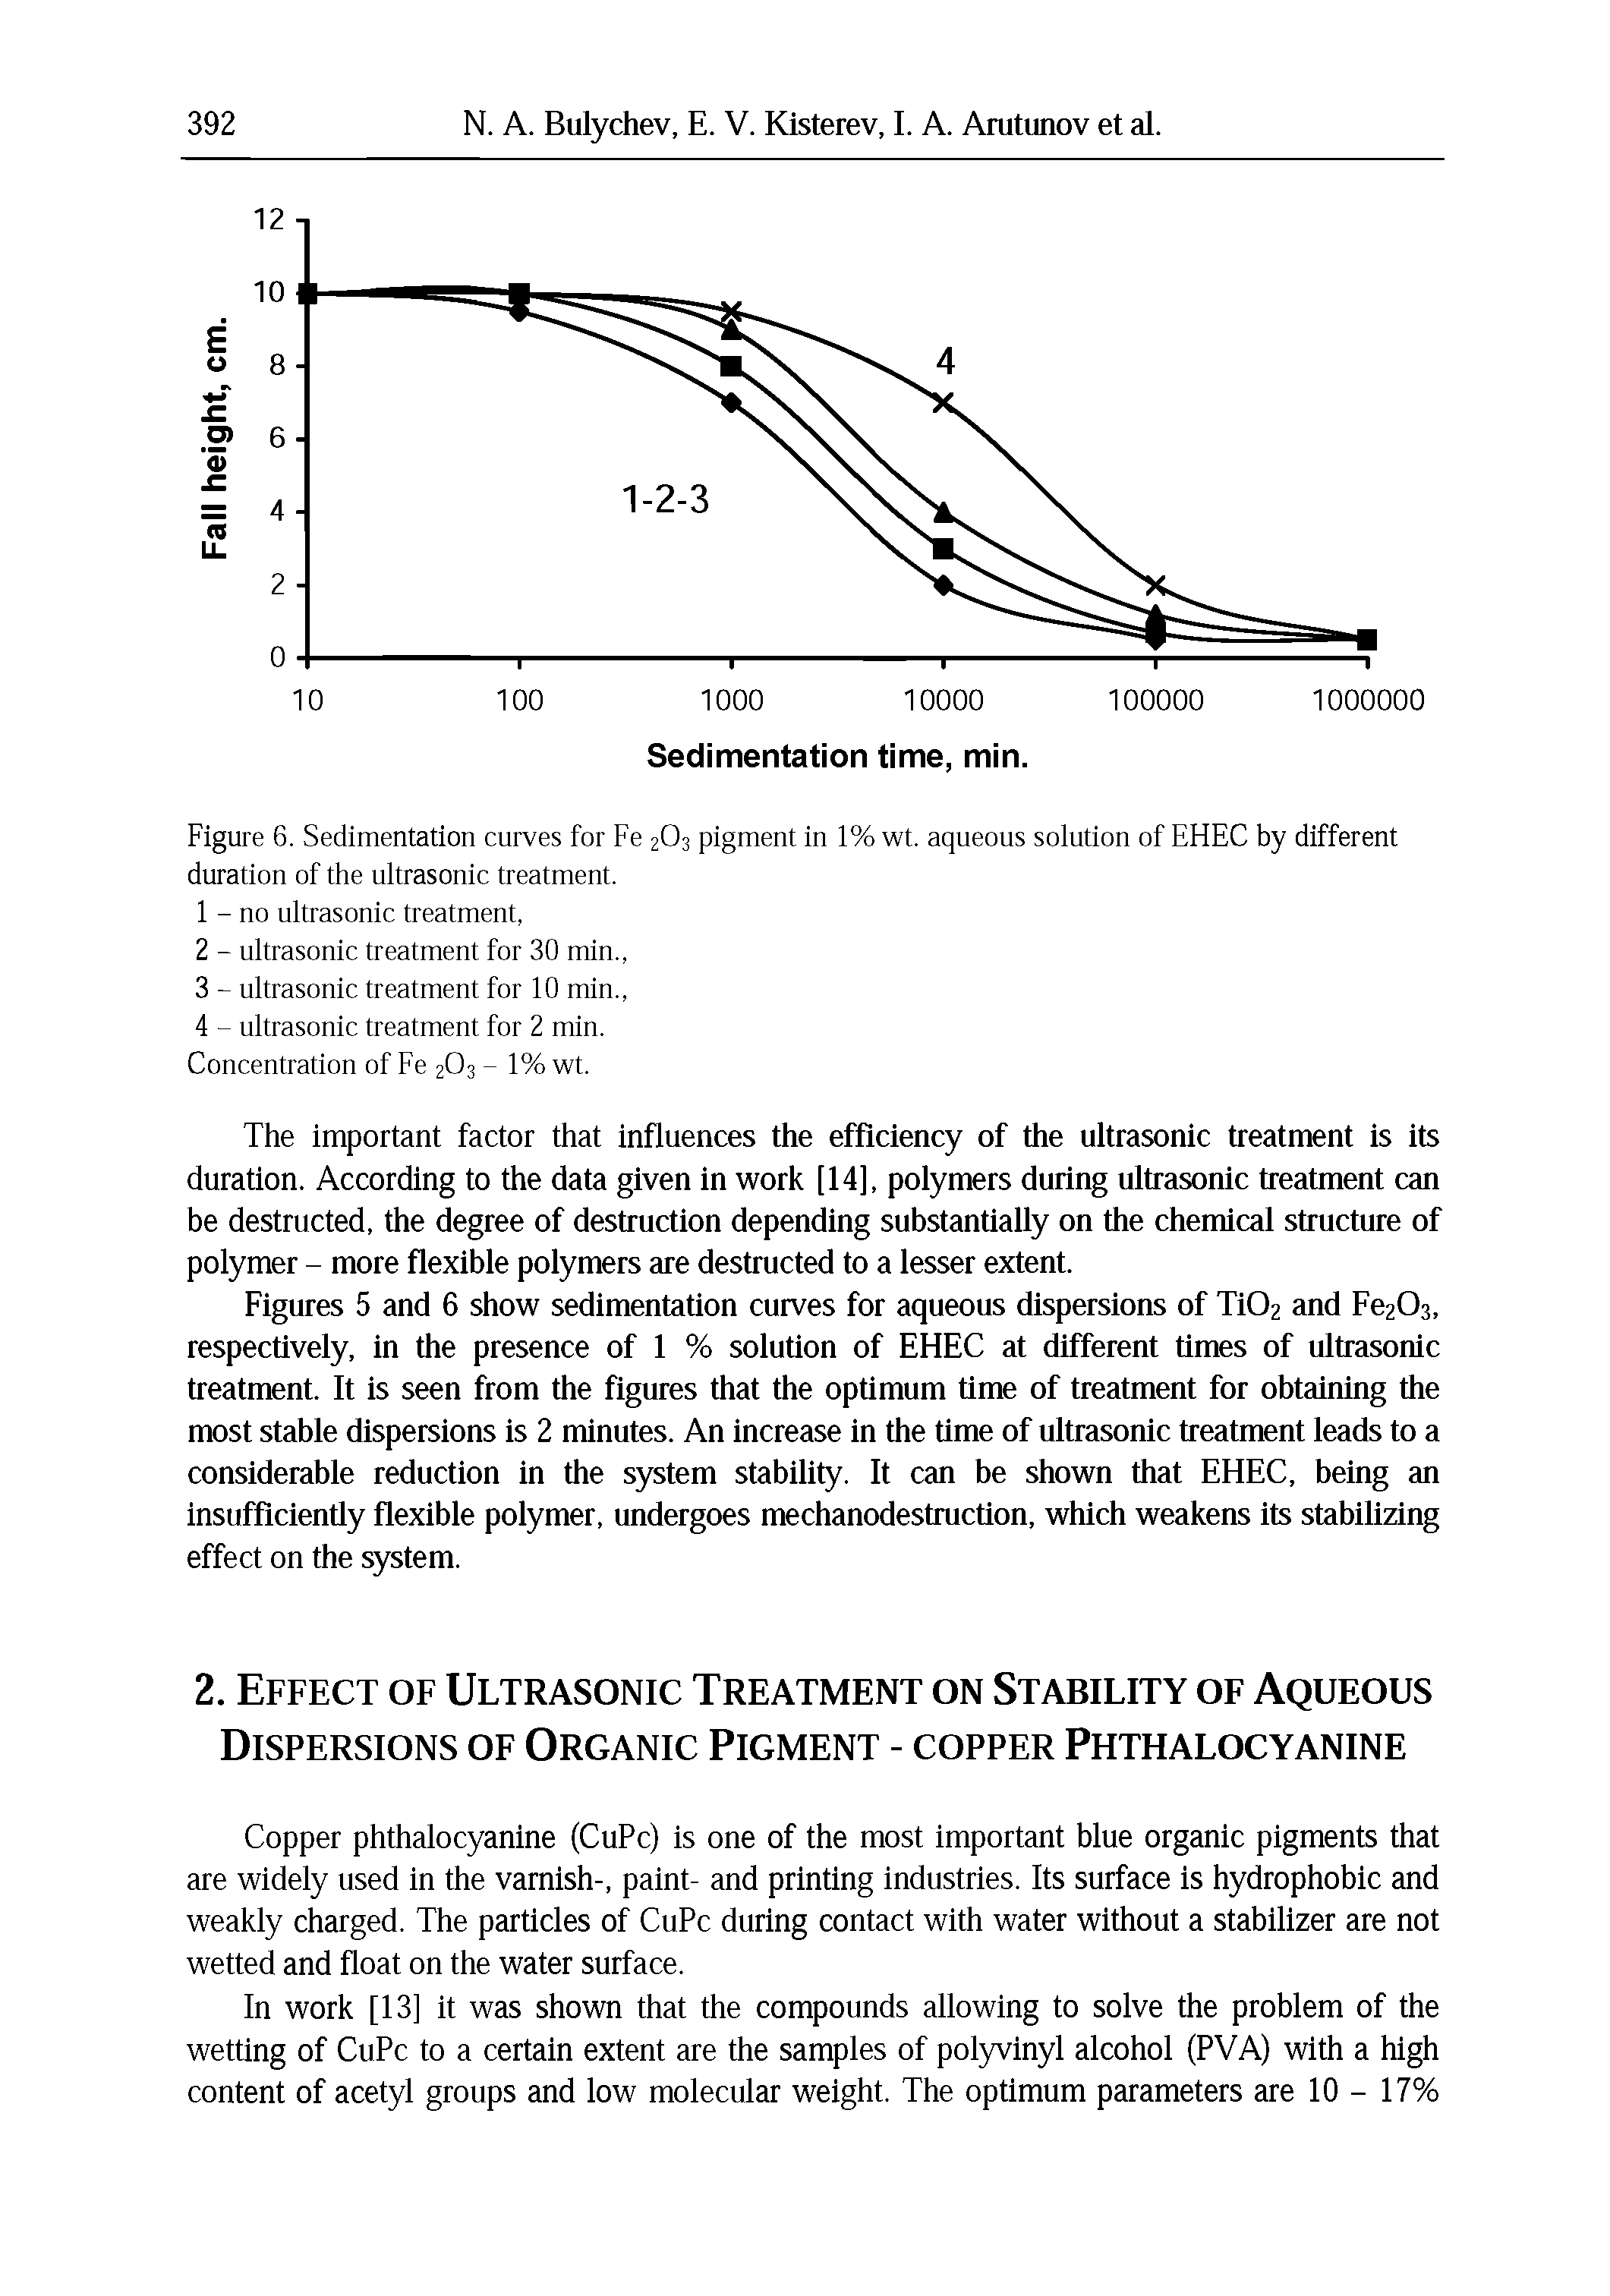 Figure 6. Sedimentation curves for Fe 203 pigment in 1% wt. aqueous solution of EHEC by different duration of the ultrasonic treatment.